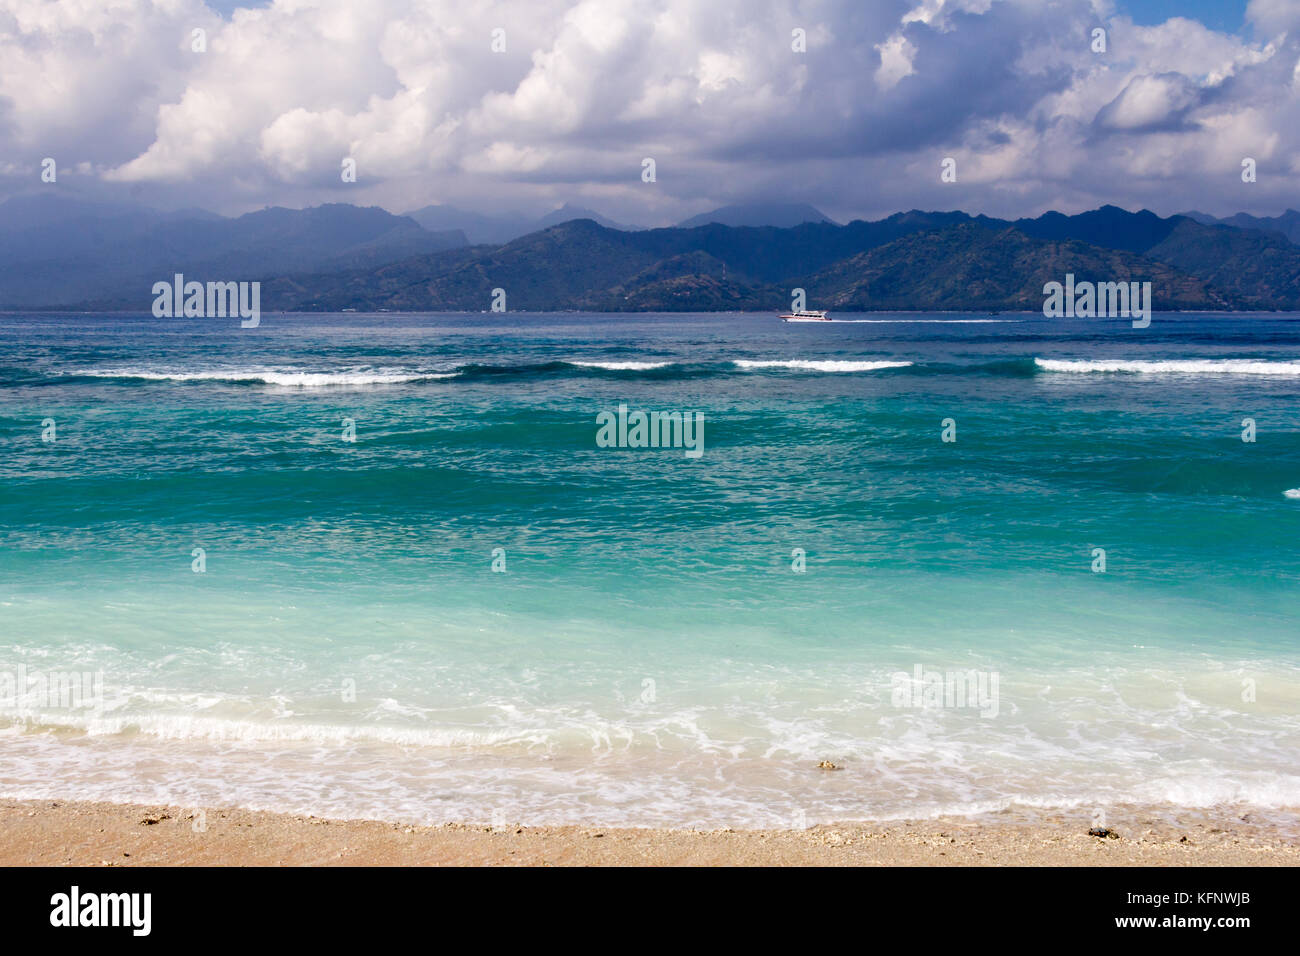 Dramatic clouds hover over mountains Gili Trawangan, Indonesia Stock Photo